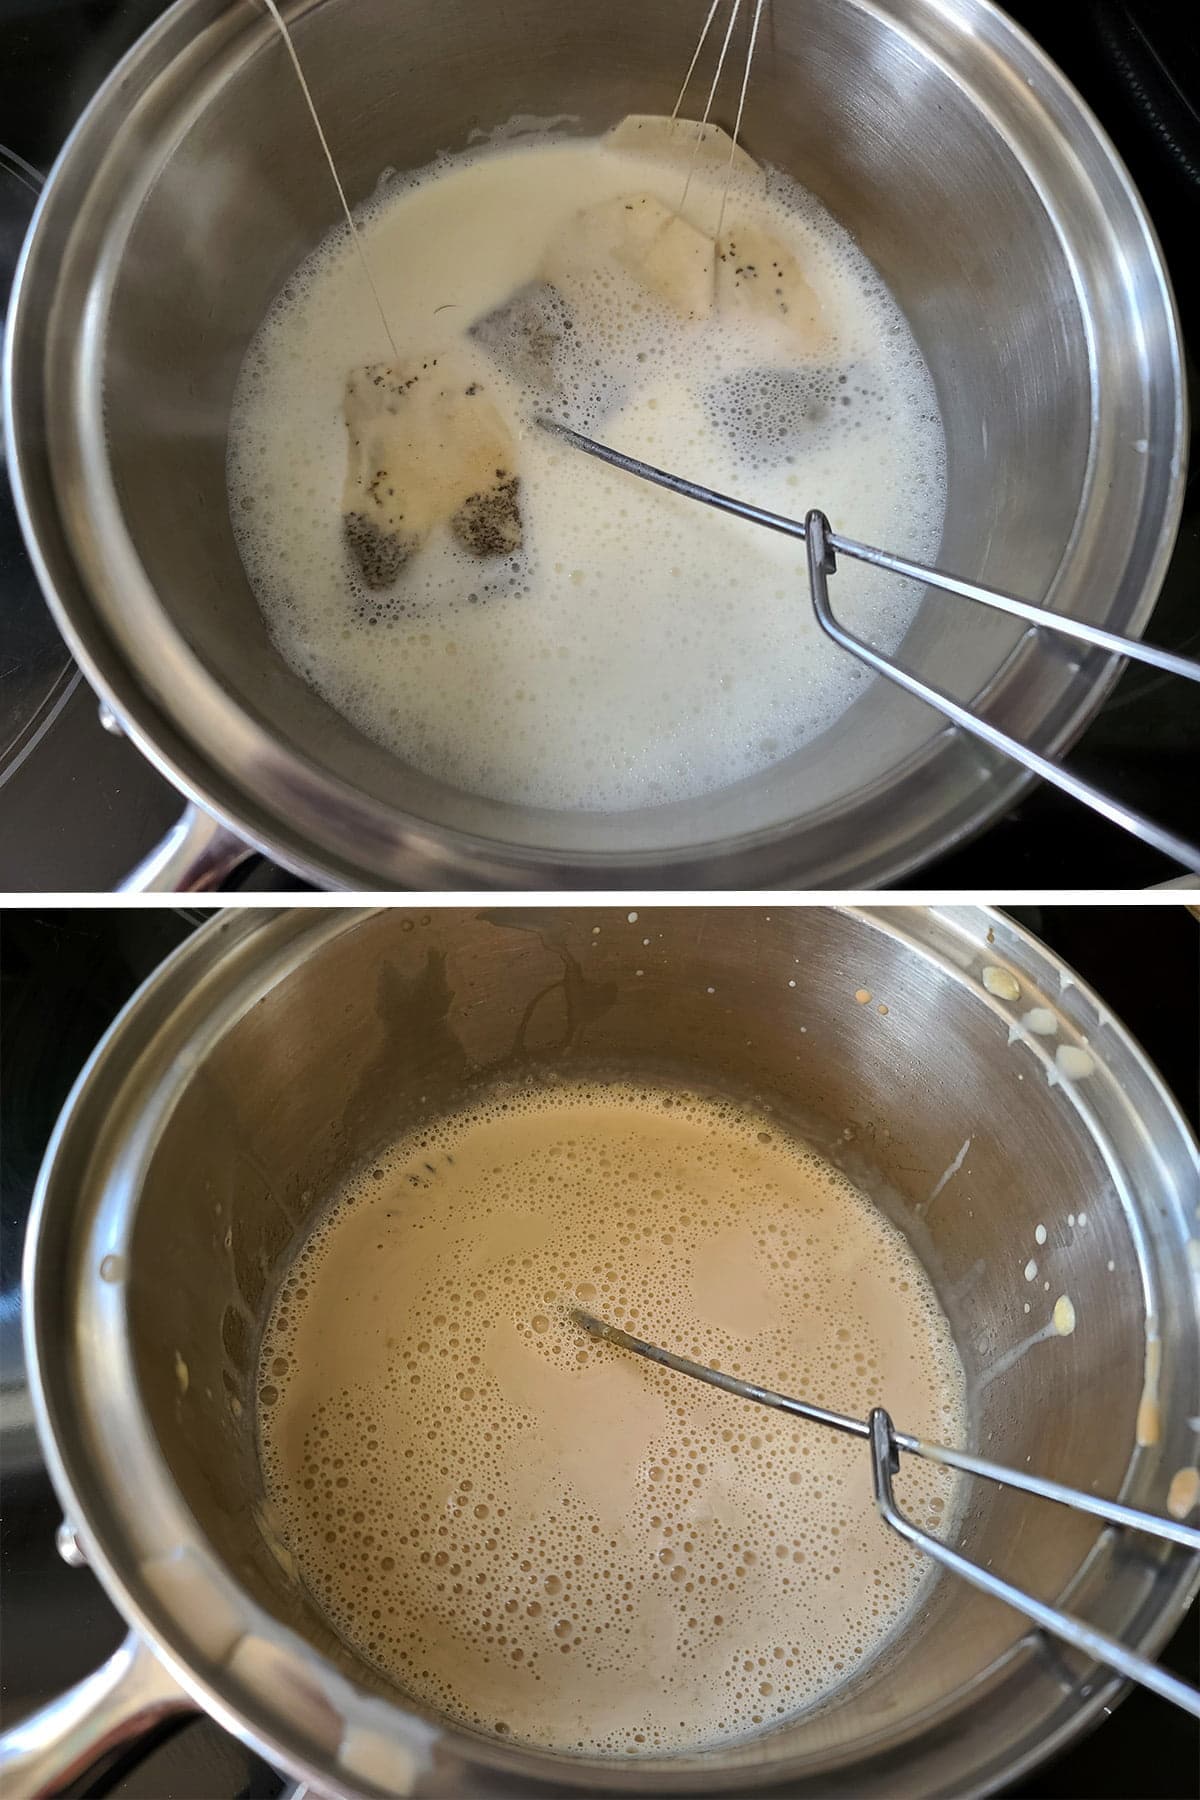 A two part compilation image showing tea bags infusing in the milk mixture, before and after it's coloured the milk brown.